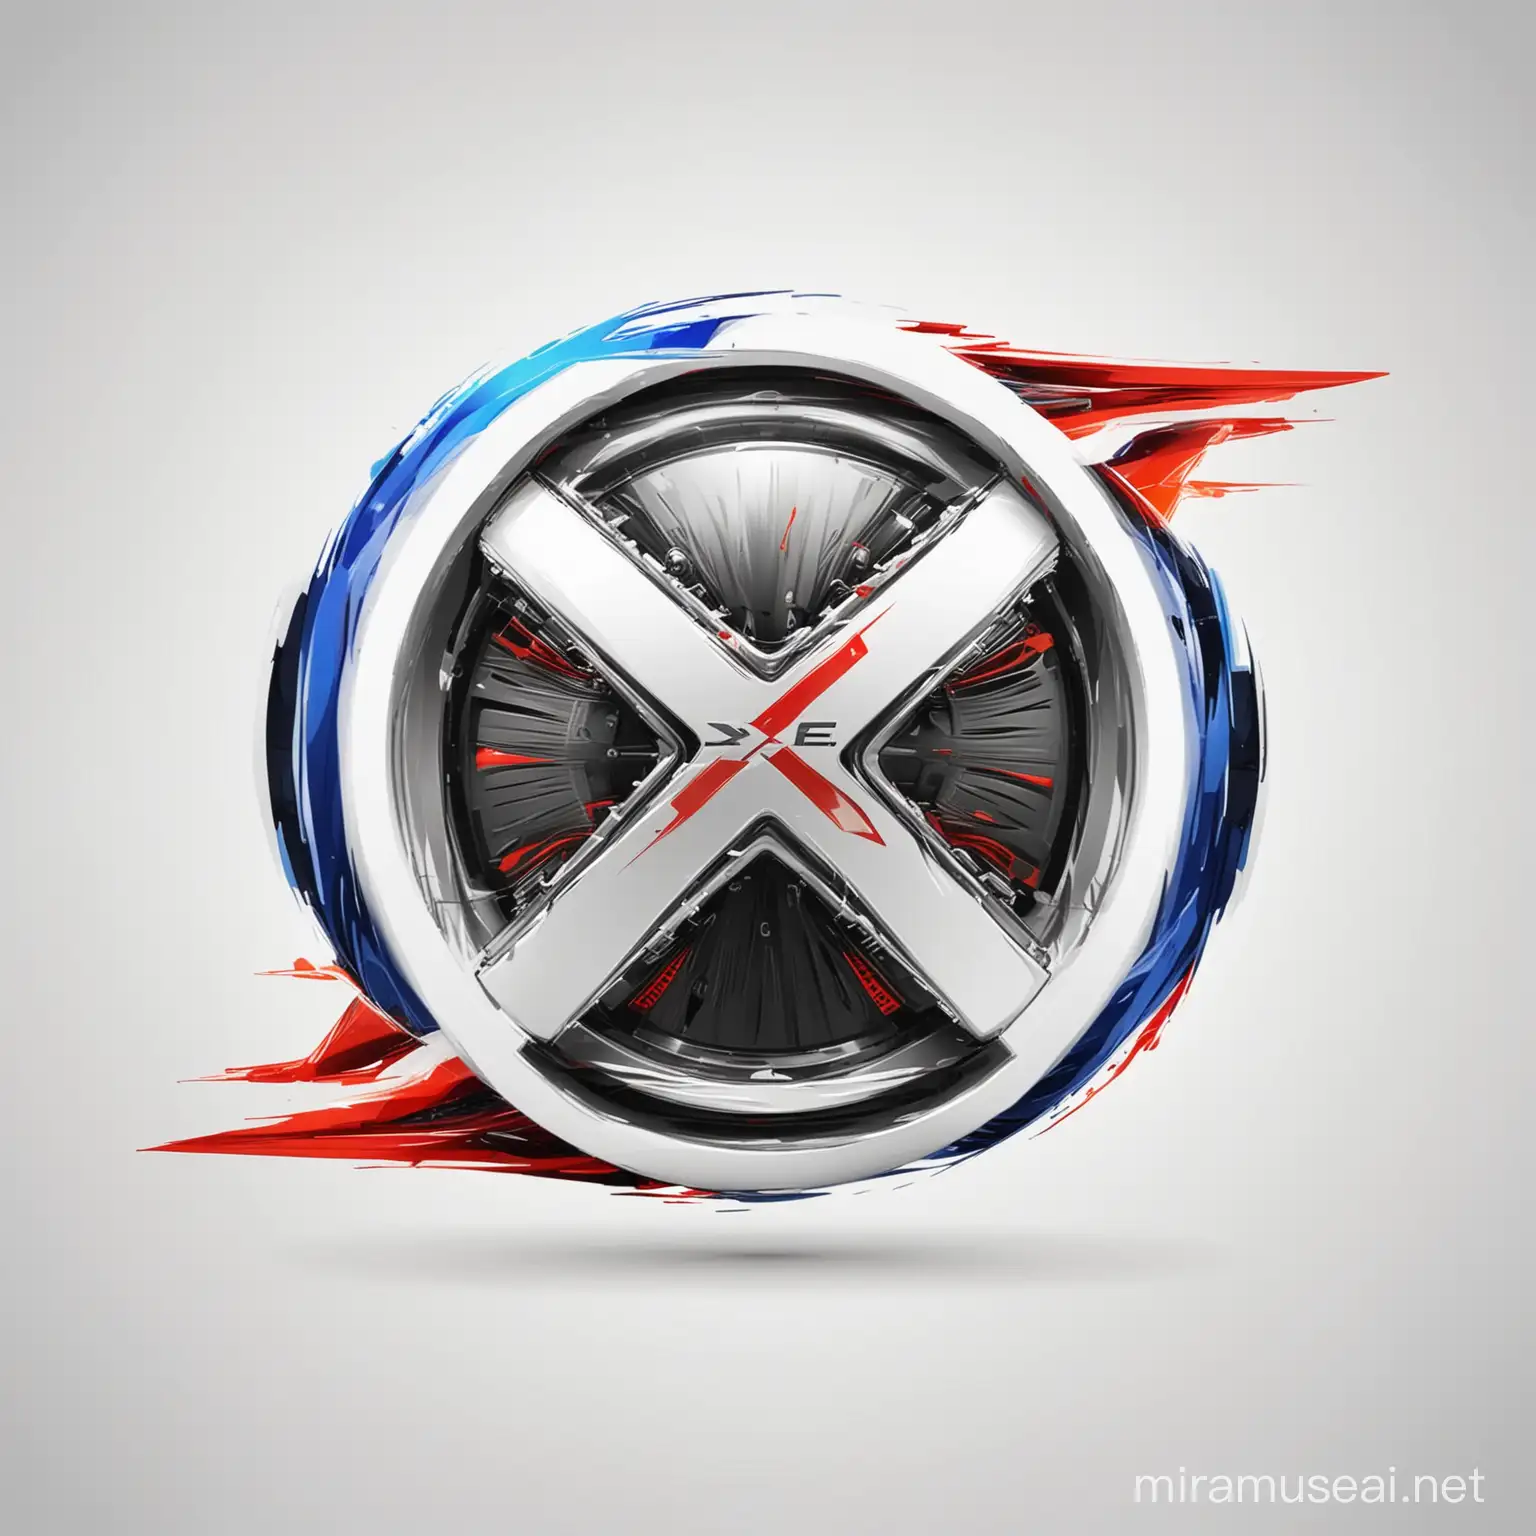 Elegant XFILE Vector Logo with AUTO SPORT Theme and Speed Effects in White Red and Blue on a Clean Background